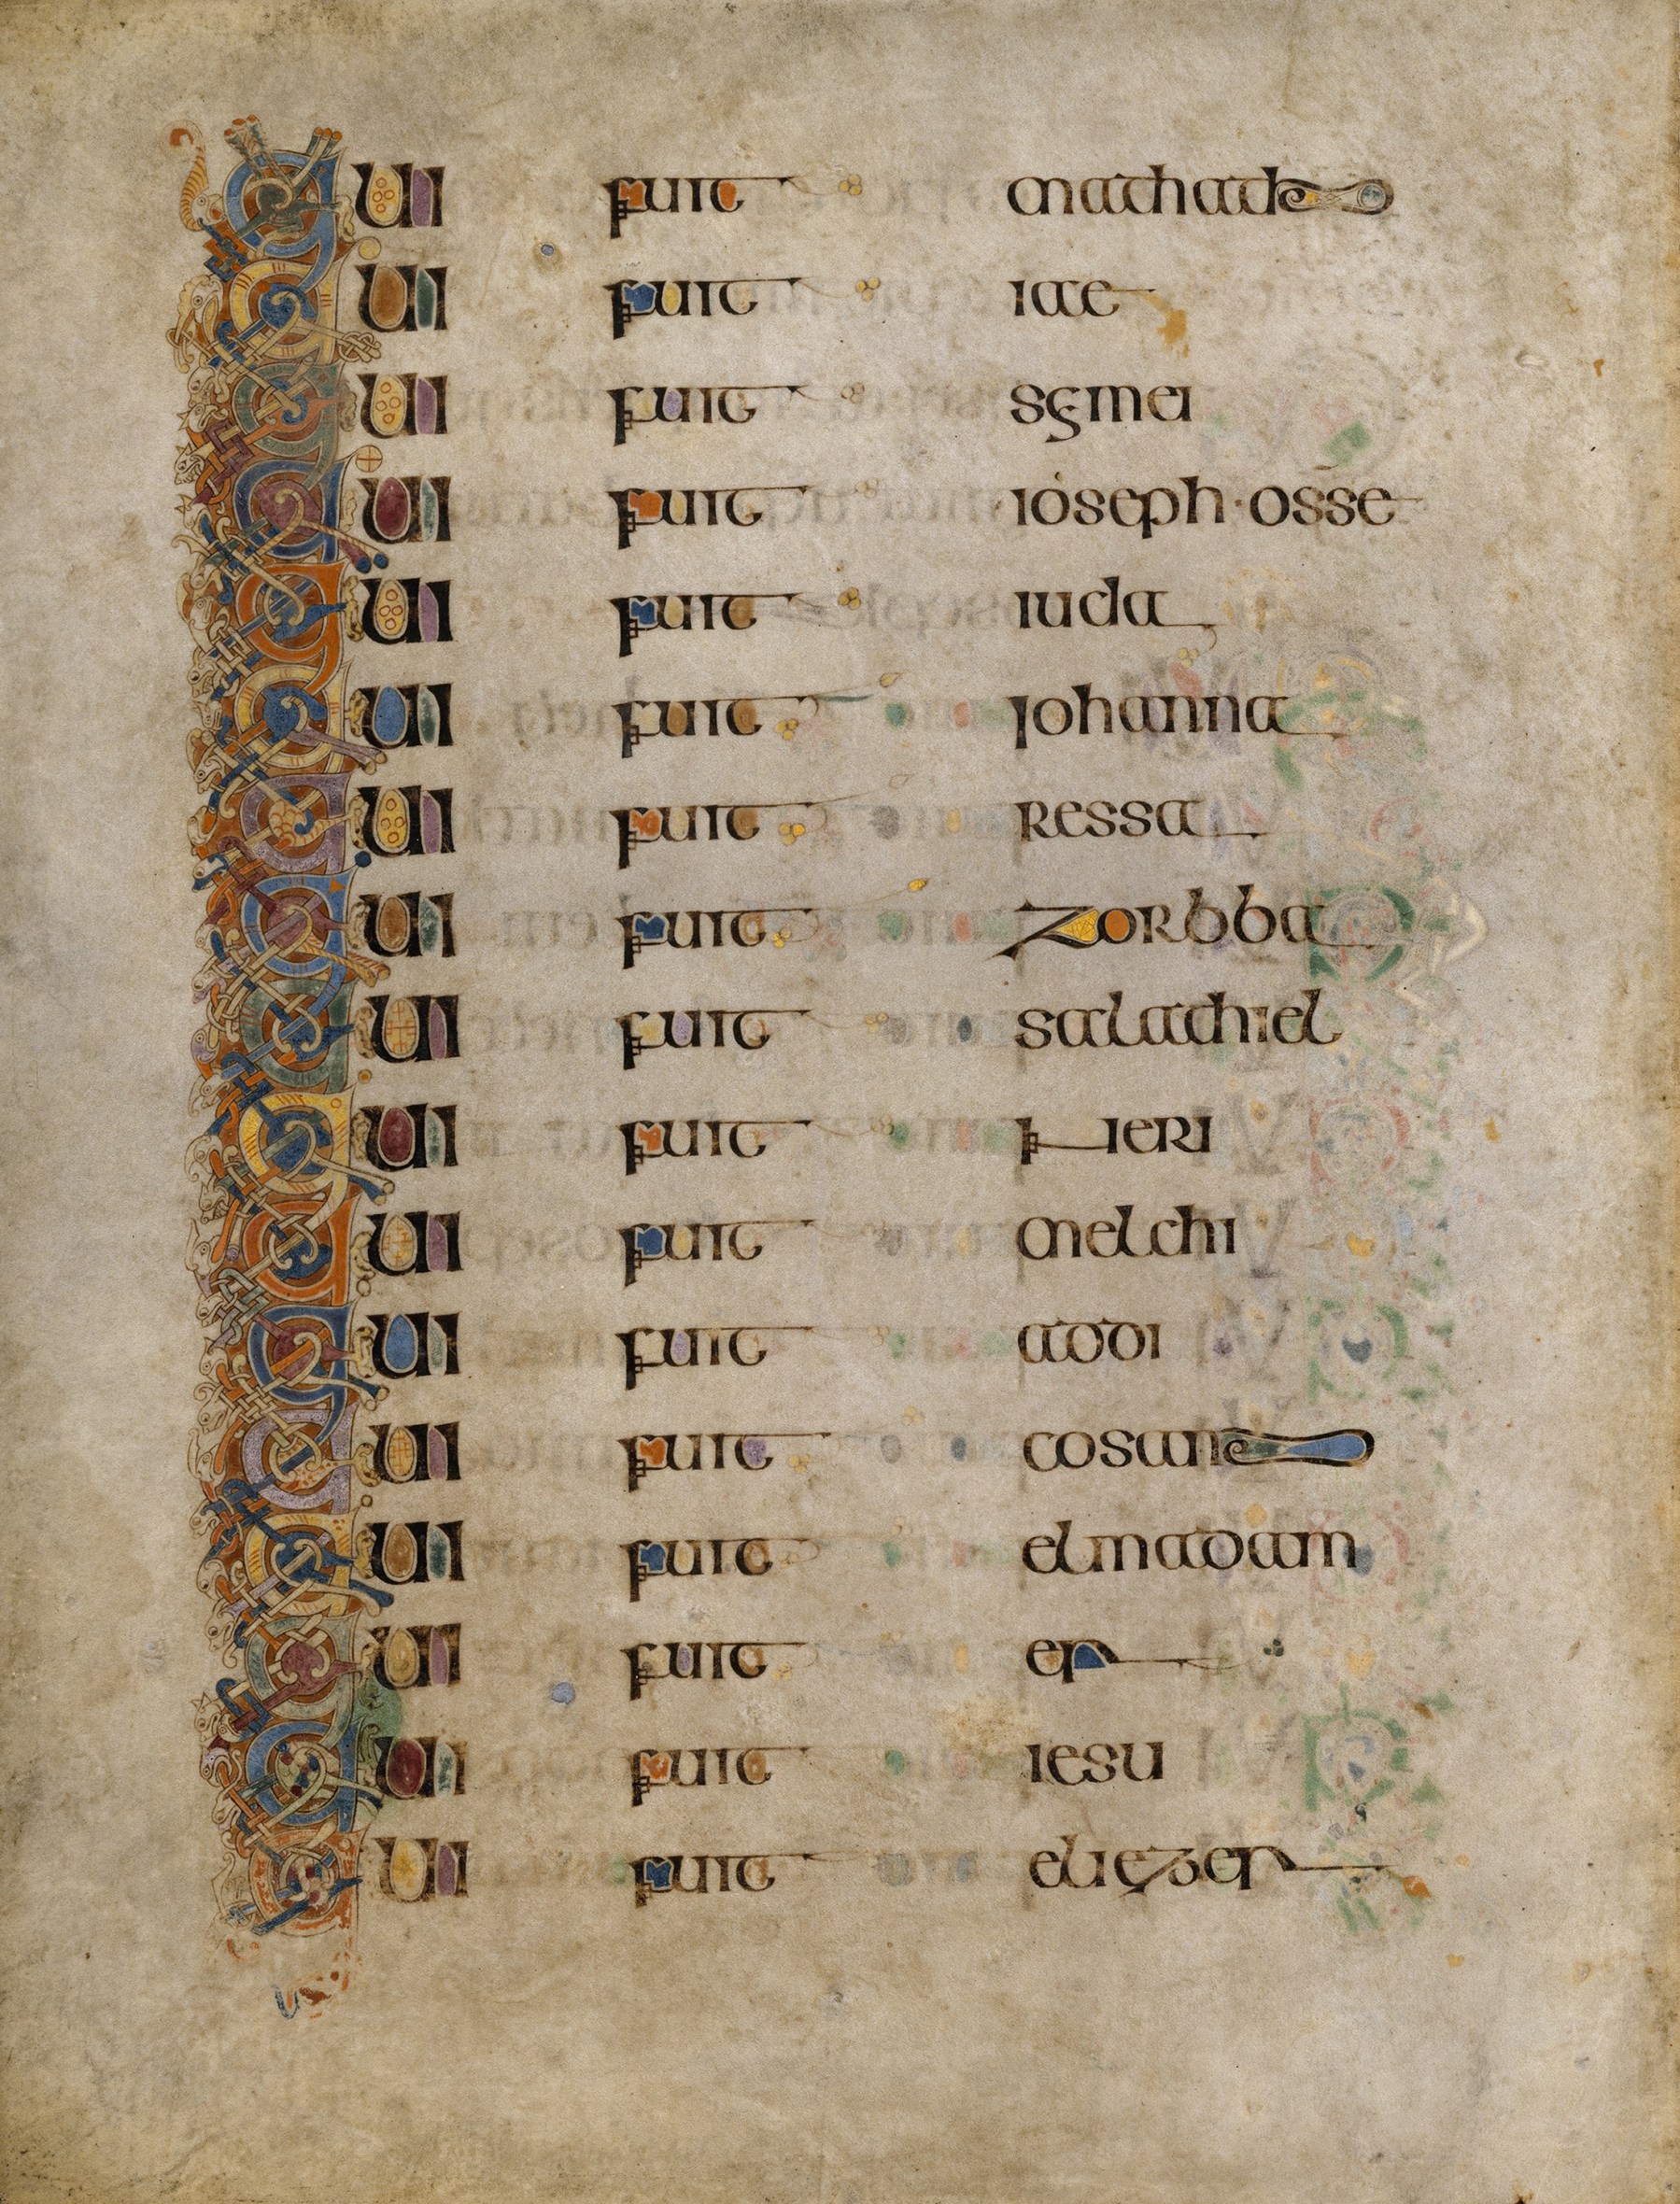 A page from the Book of Kells